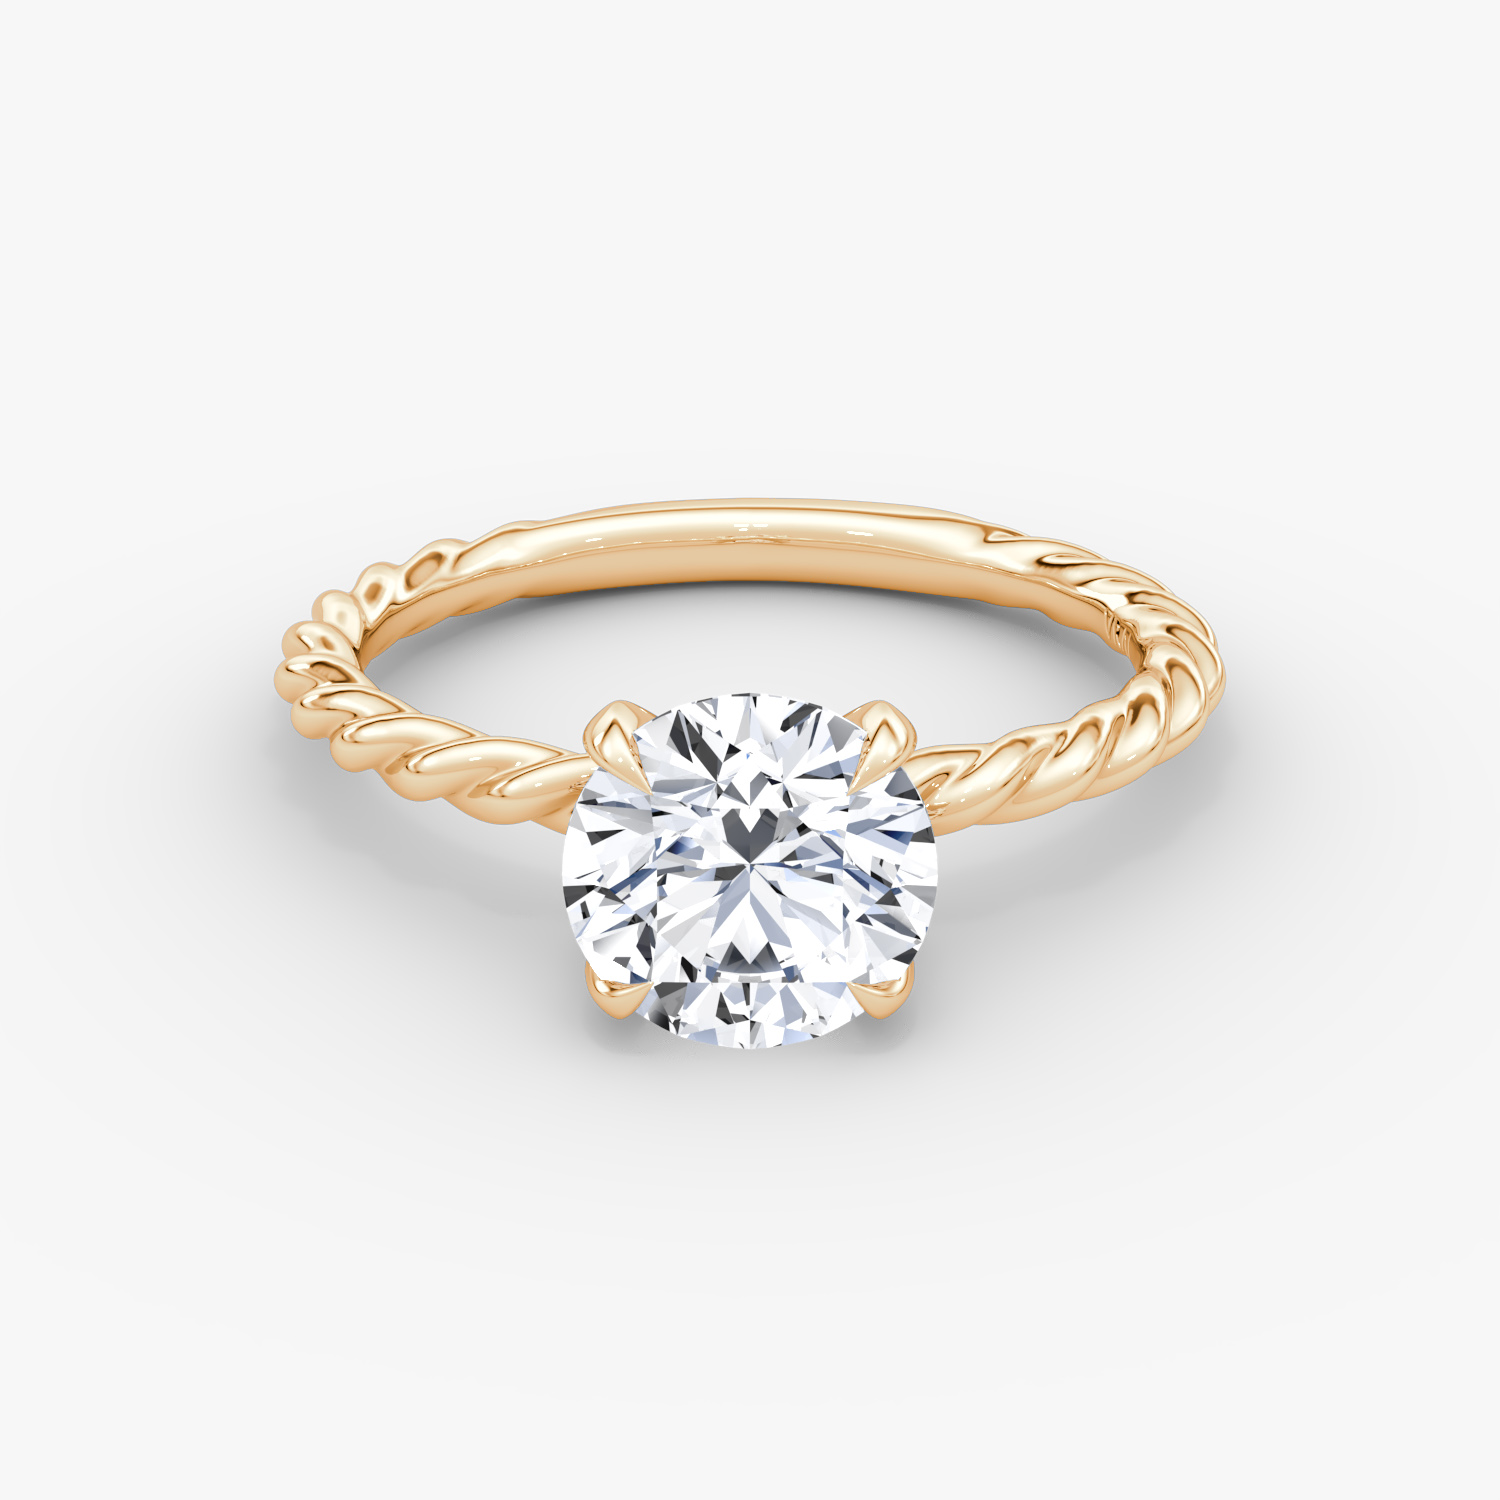 Ladies Solitaire Diamond Engagement Ring, Platinum and 18kt Yellow Gold 4  Claw Set Design, Oval Cut Diamond 0.33ct, E Colour, VS1 Clarity, EX Polish,  VG Symmetry, Rope Detail Band - Blair and Sheridan